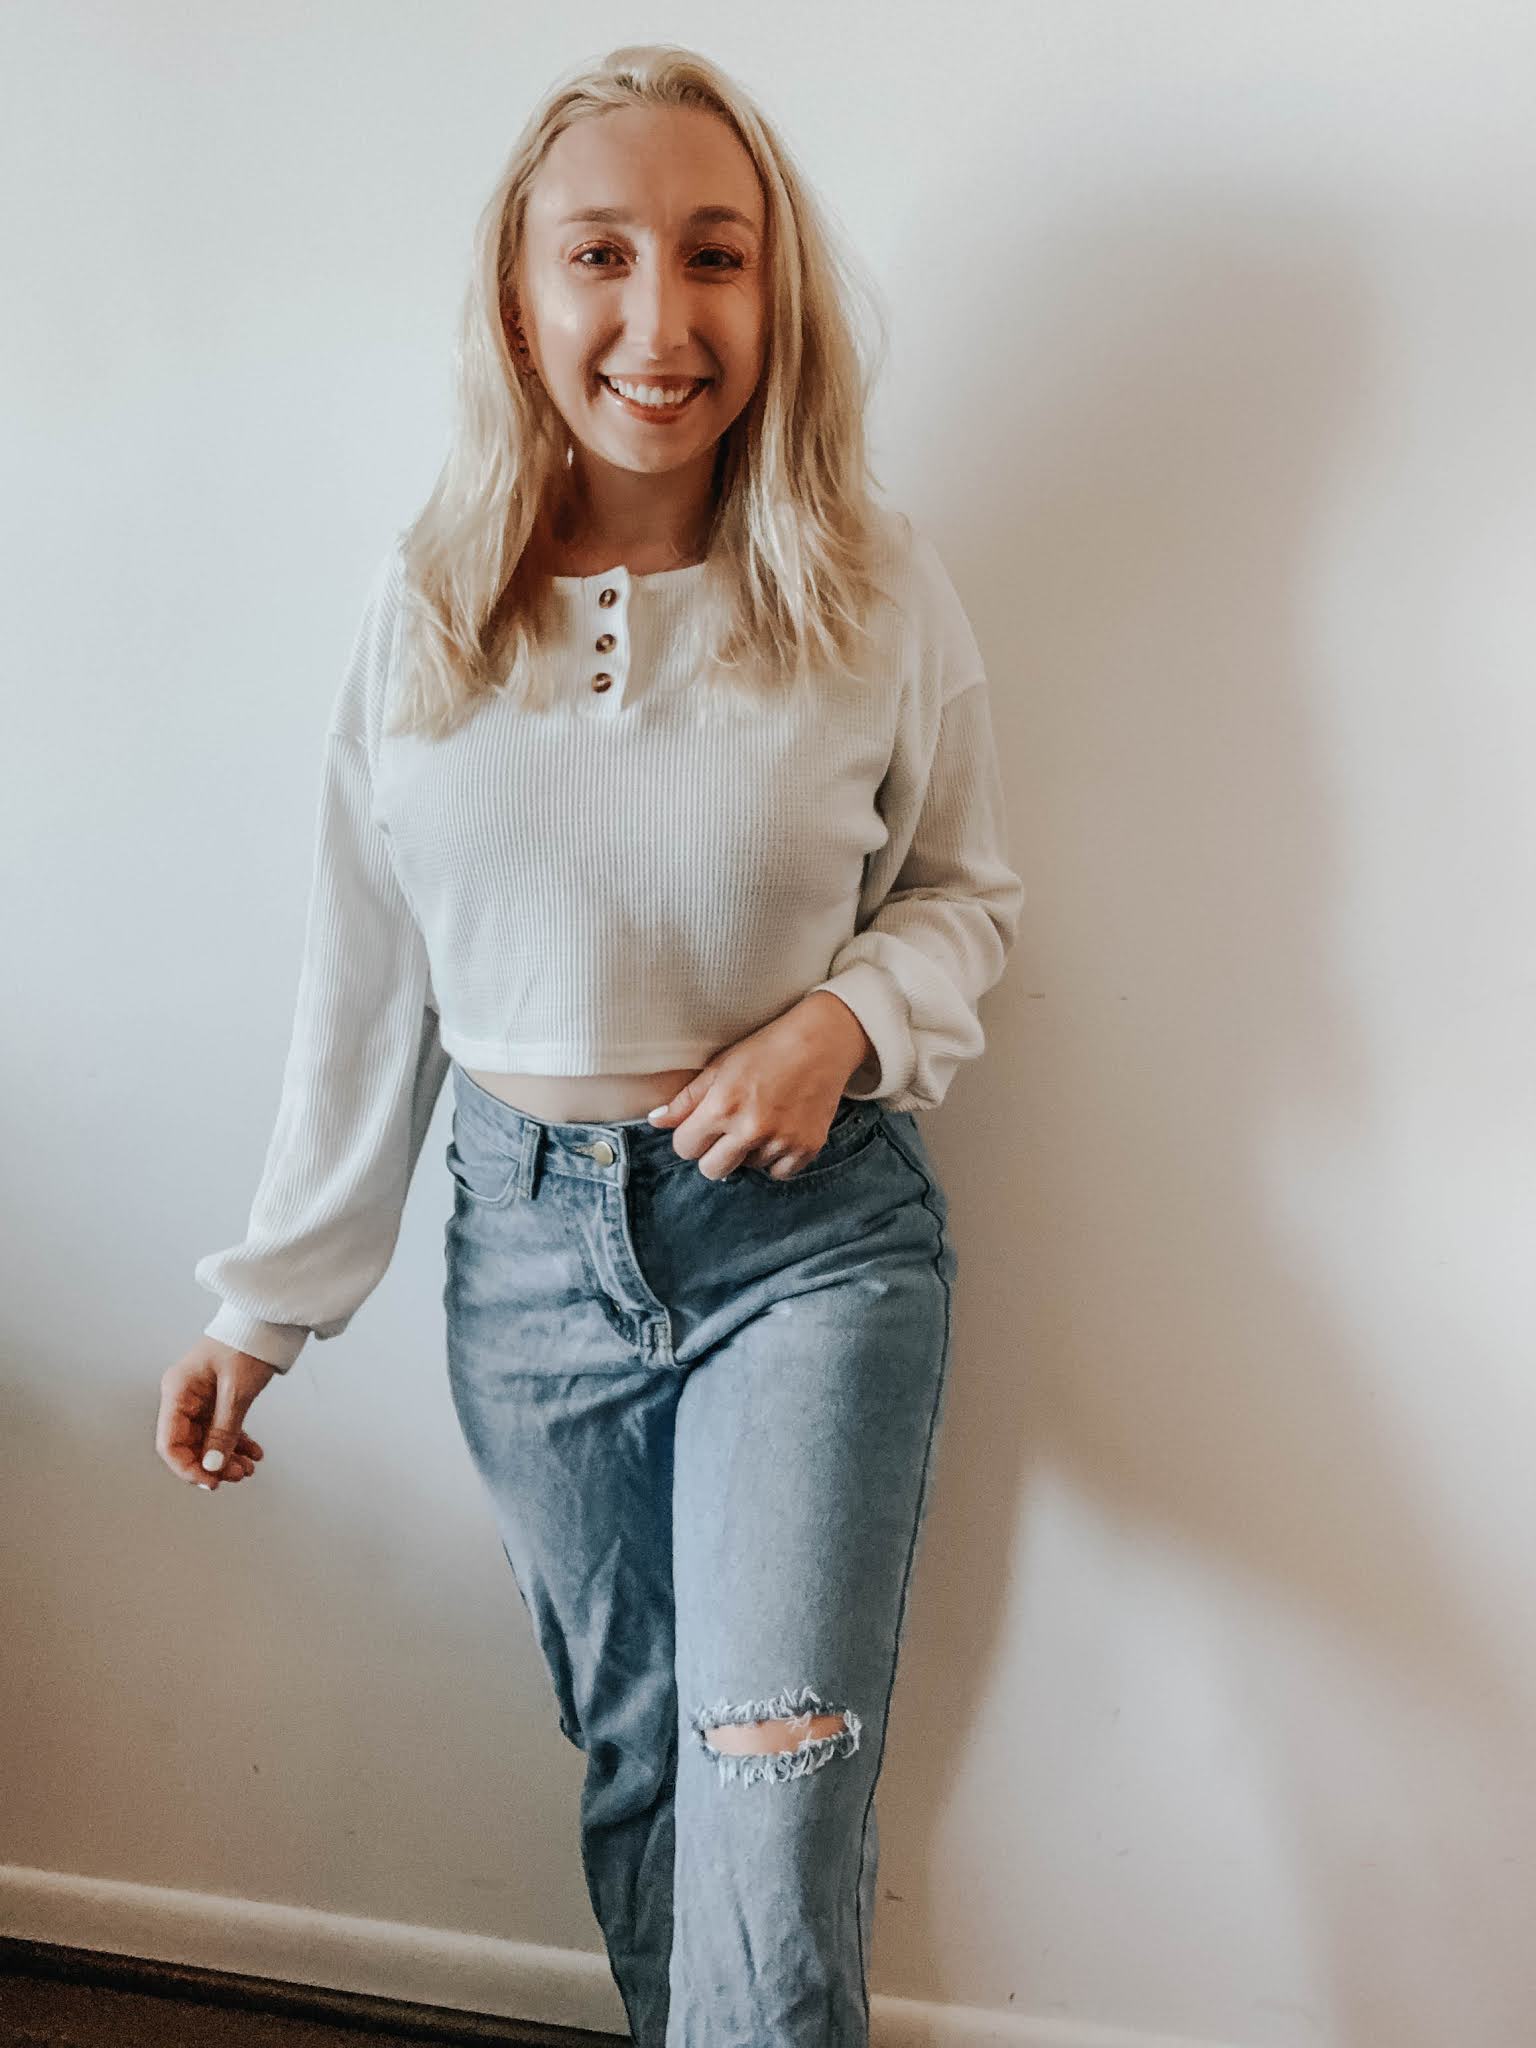 SheIn Try-On Haul